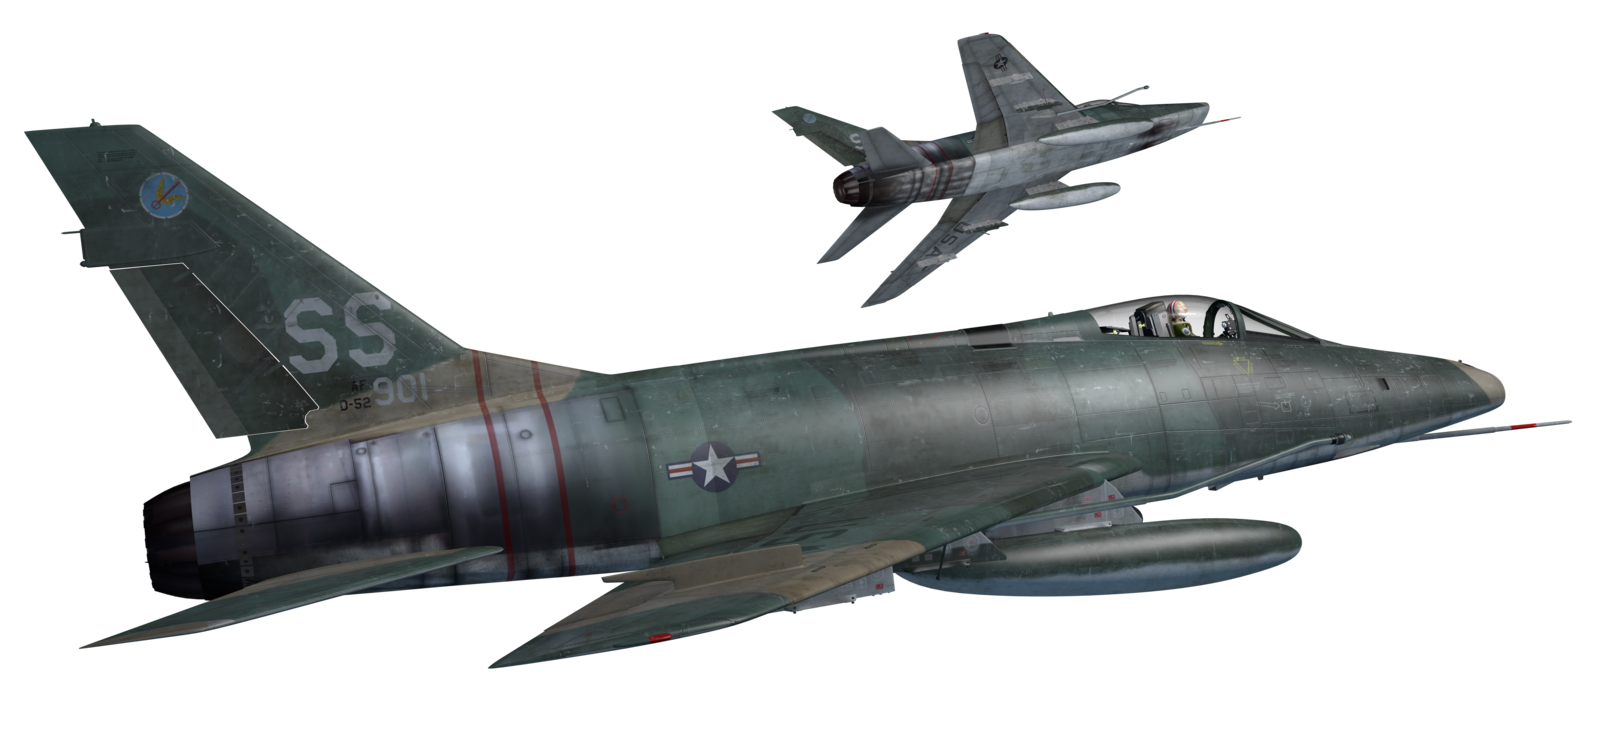 Air Force Jet Png - Fallout, Air Force, Aircraft, Army, Pictures, Planes, Weapons, Airplanes, Weapons Guns, Transparent background PNG HD thumbnail